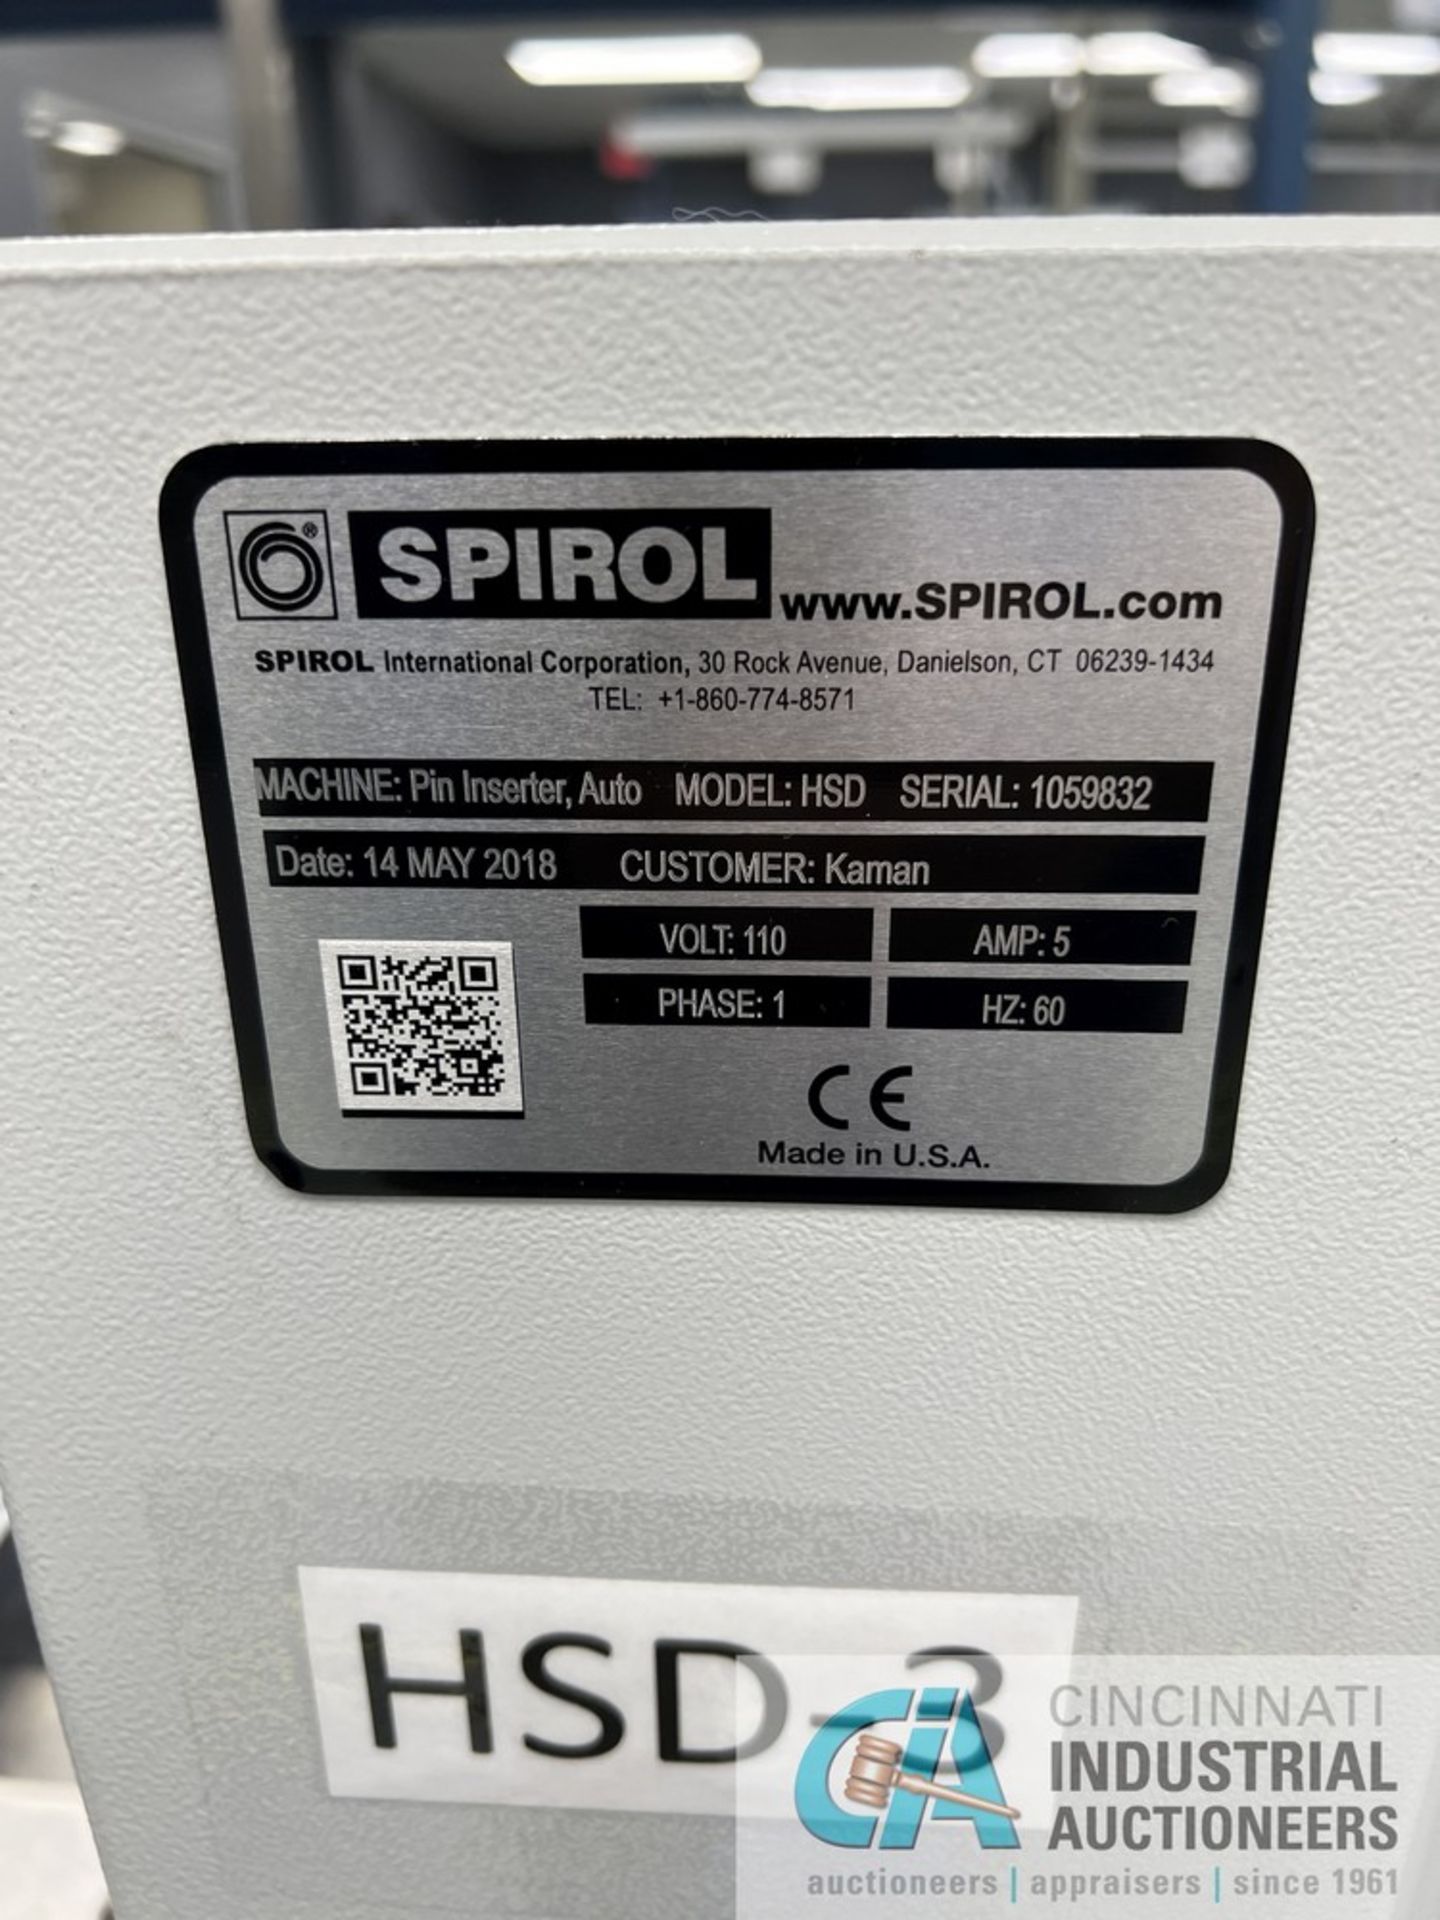 SPIROL MODEL HSD AUTO PIN INSERTER; S/N 1059832 (2018), WITH (2) 7" VIBRATORY BOWLS (JPF) - Image 6 of 7